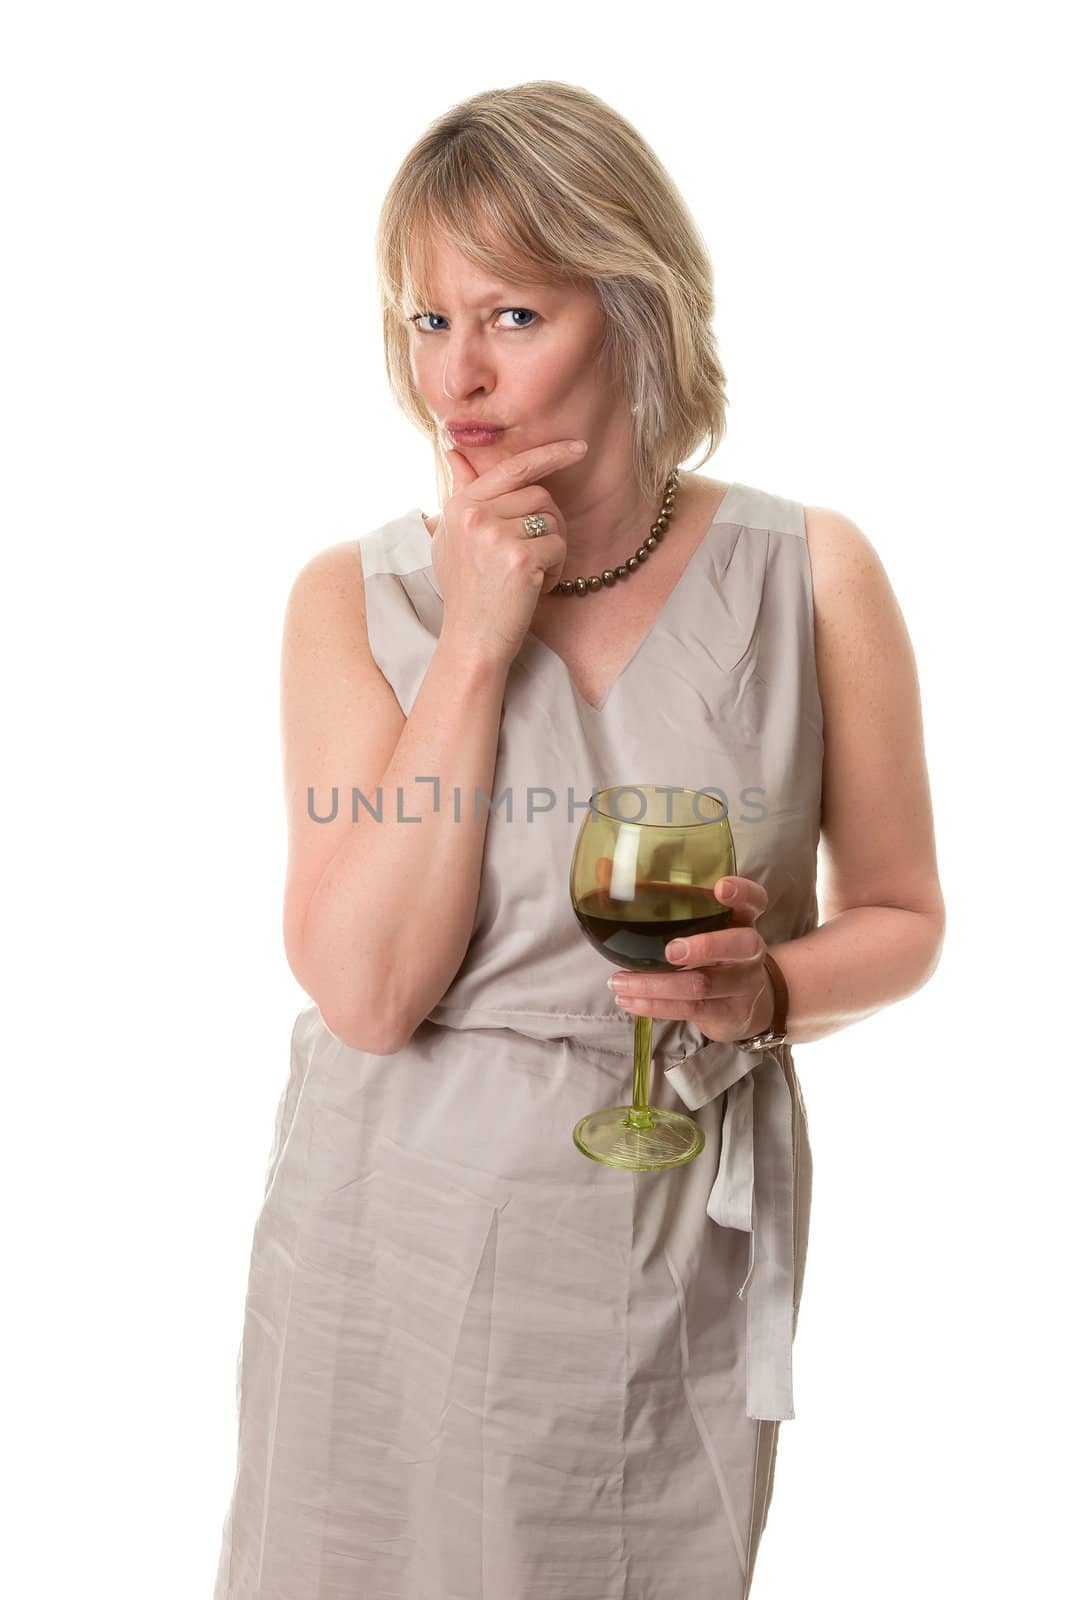 Attractive Mature Woman Pursing Lips in Thought with Hand to Face Holding Wine Glass Isolated